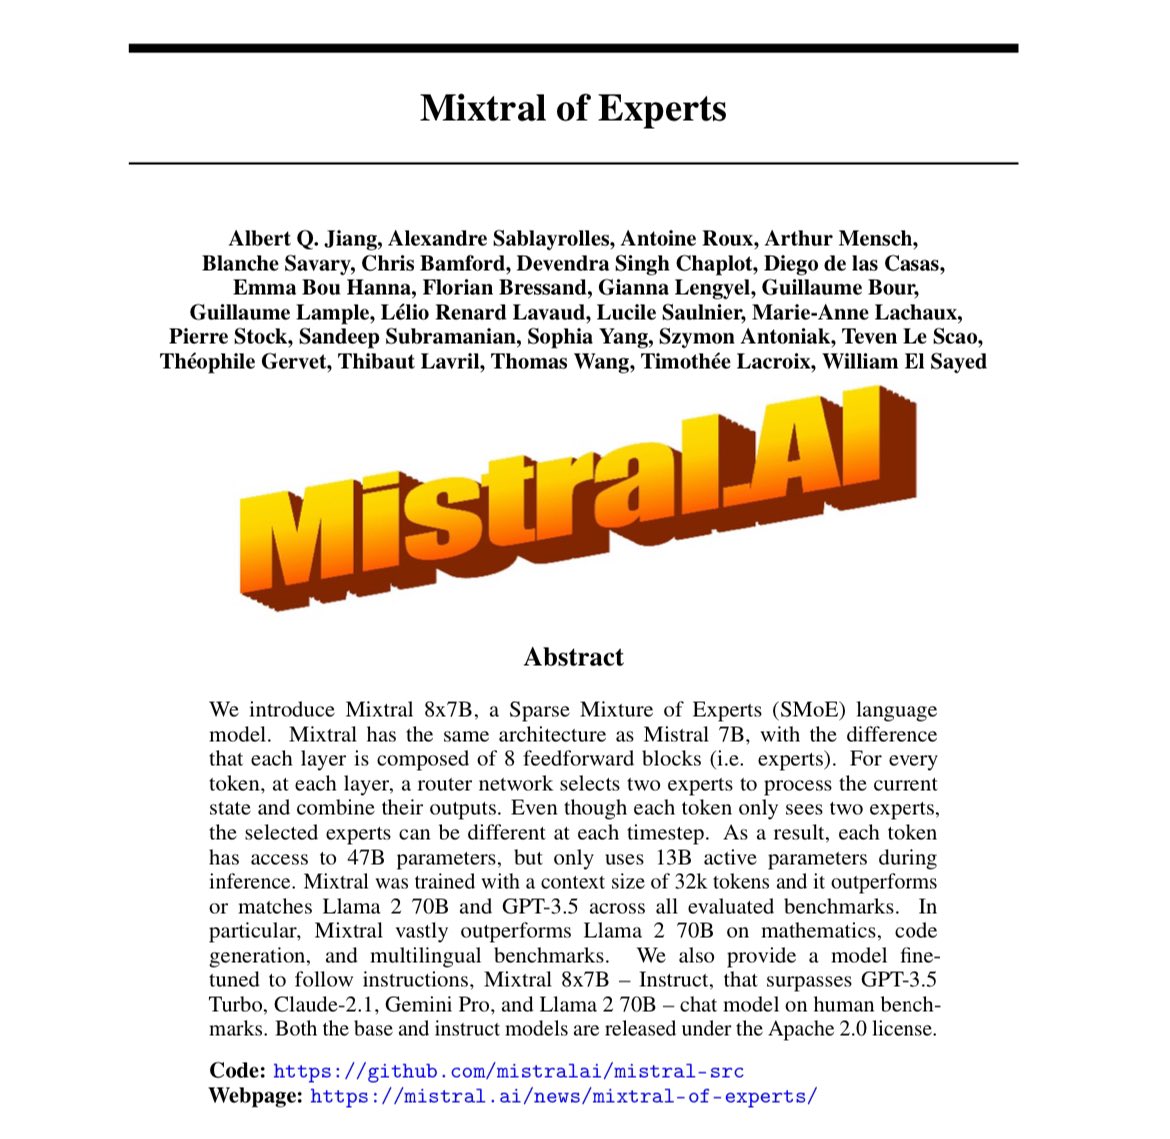 We just released Mixtral 8x7B paper on Arxiv: arxiv.org/abs/2401.04088